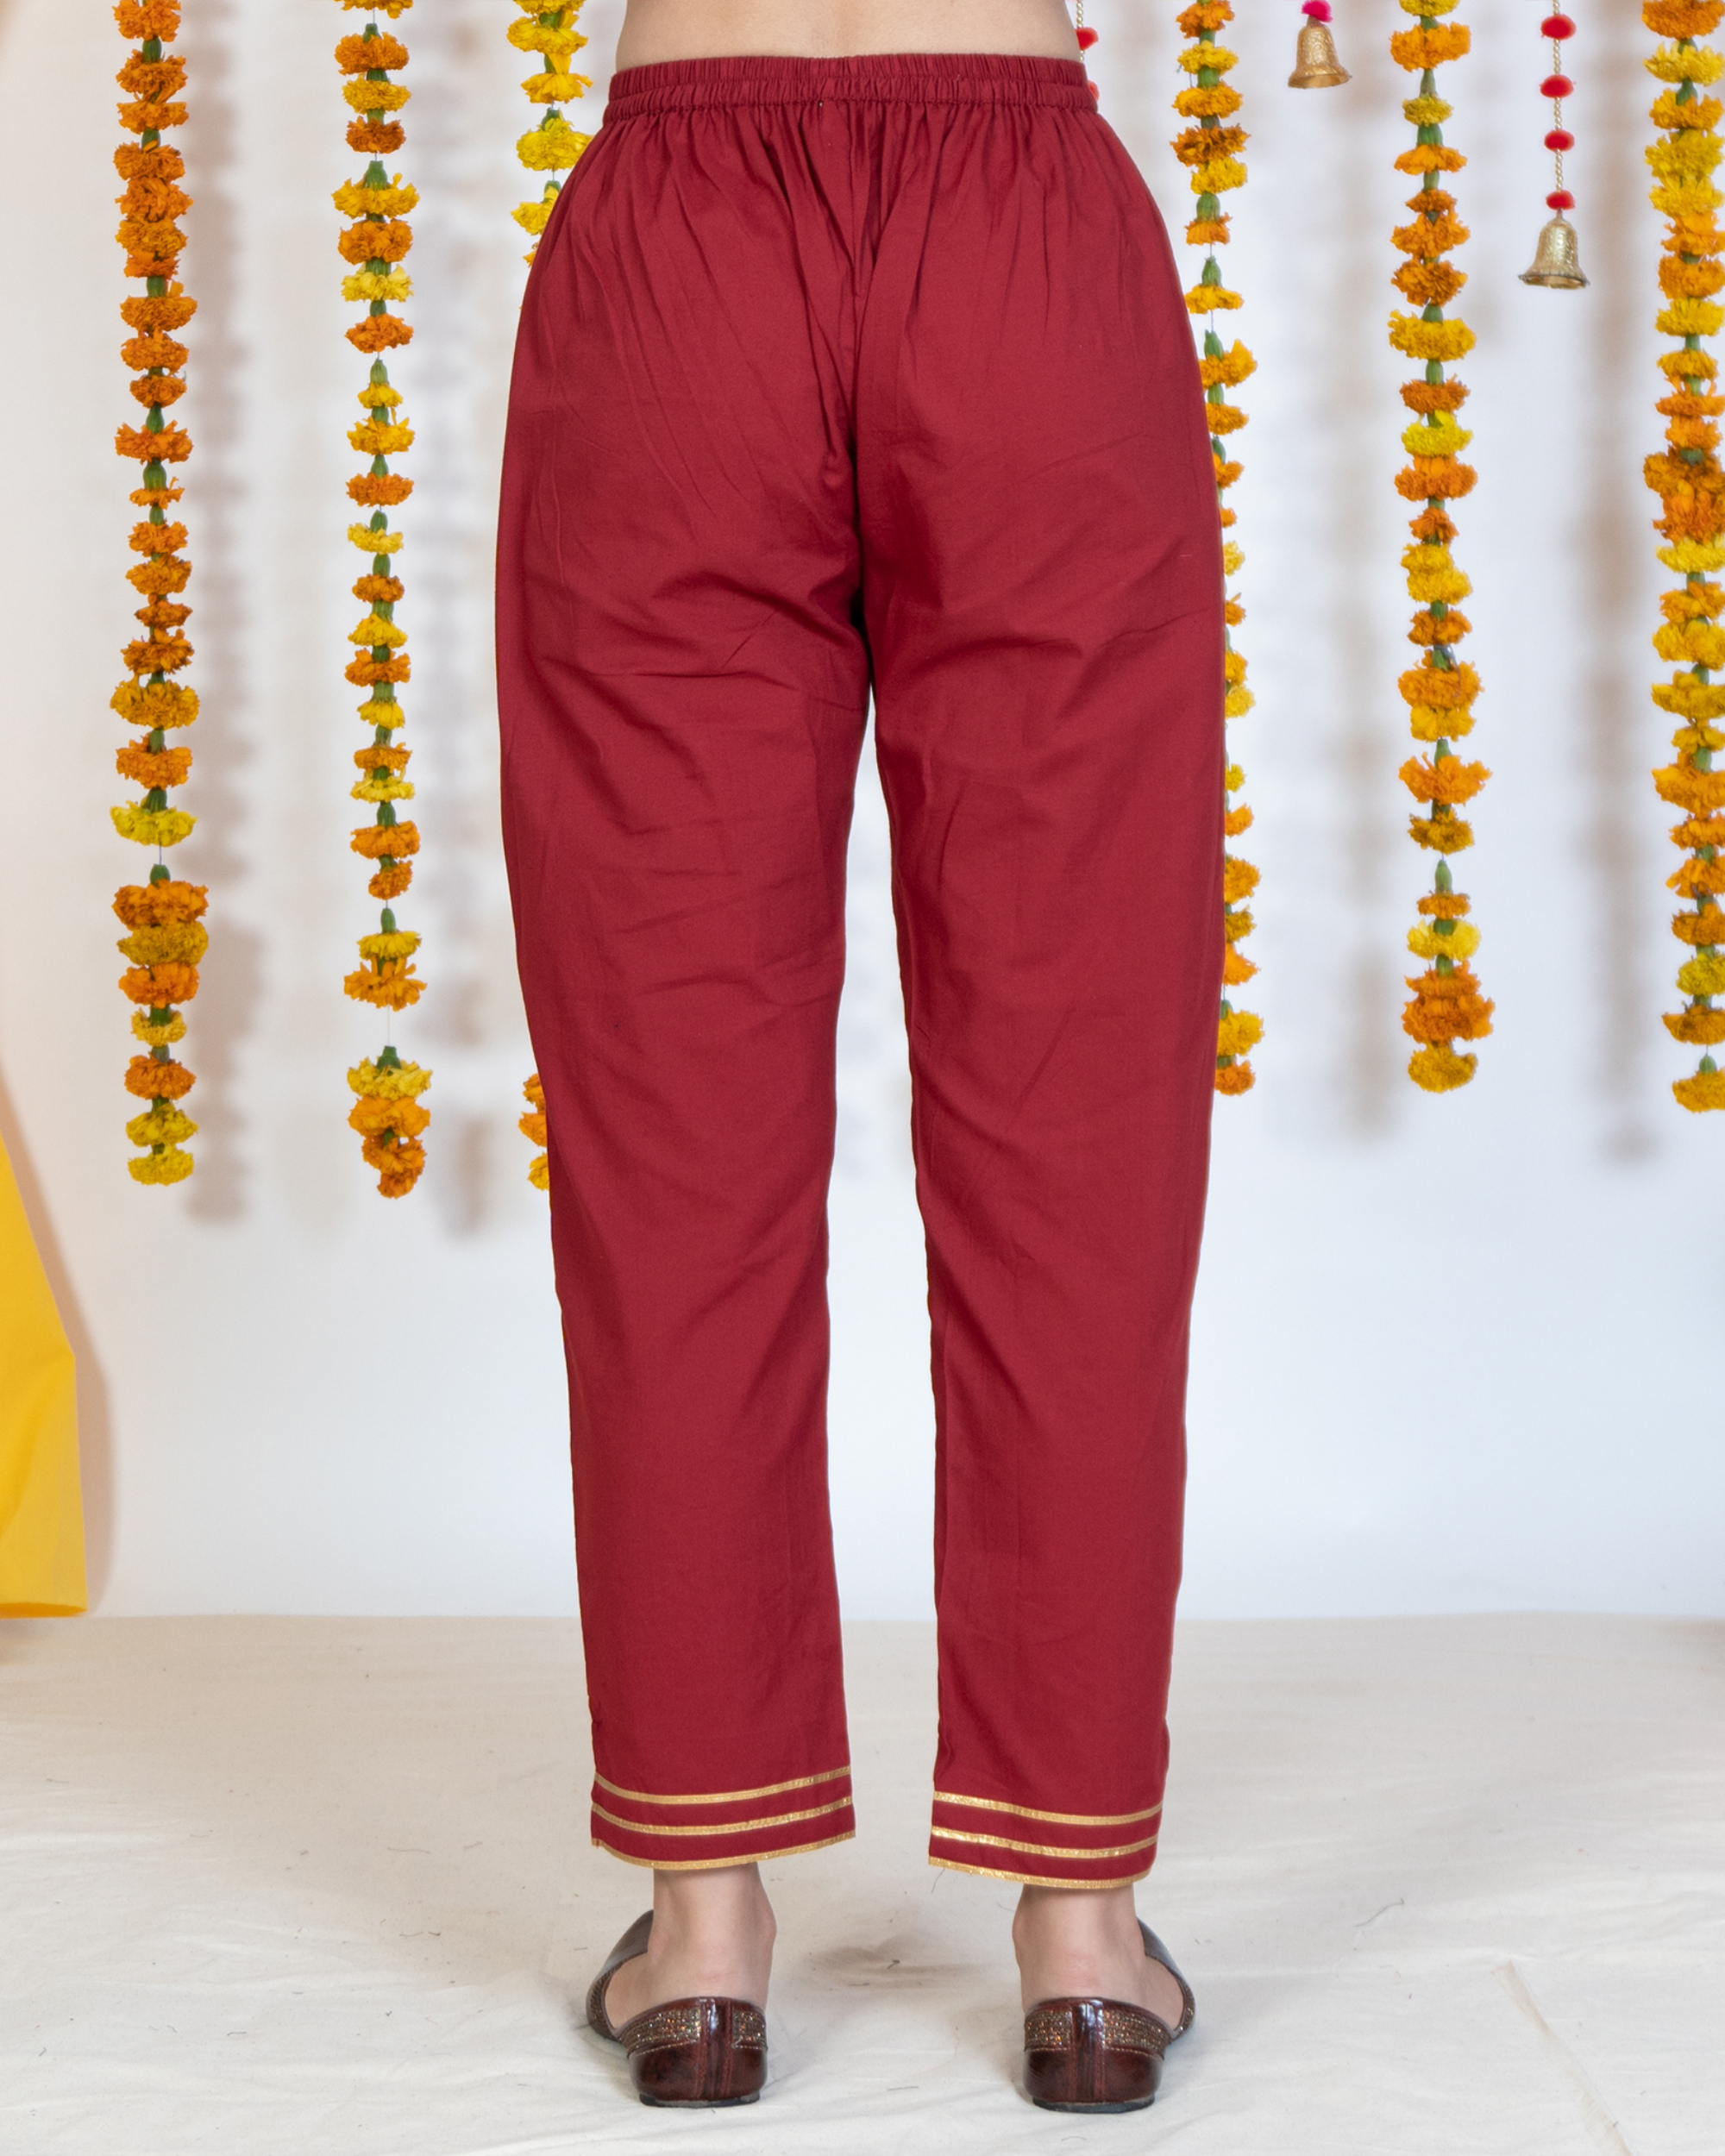 Buy Black and Maroon Combo of 2 Solid Women Regular Fit Trousers Cotton  Slub for Best Price, Reviews, Free Shipping